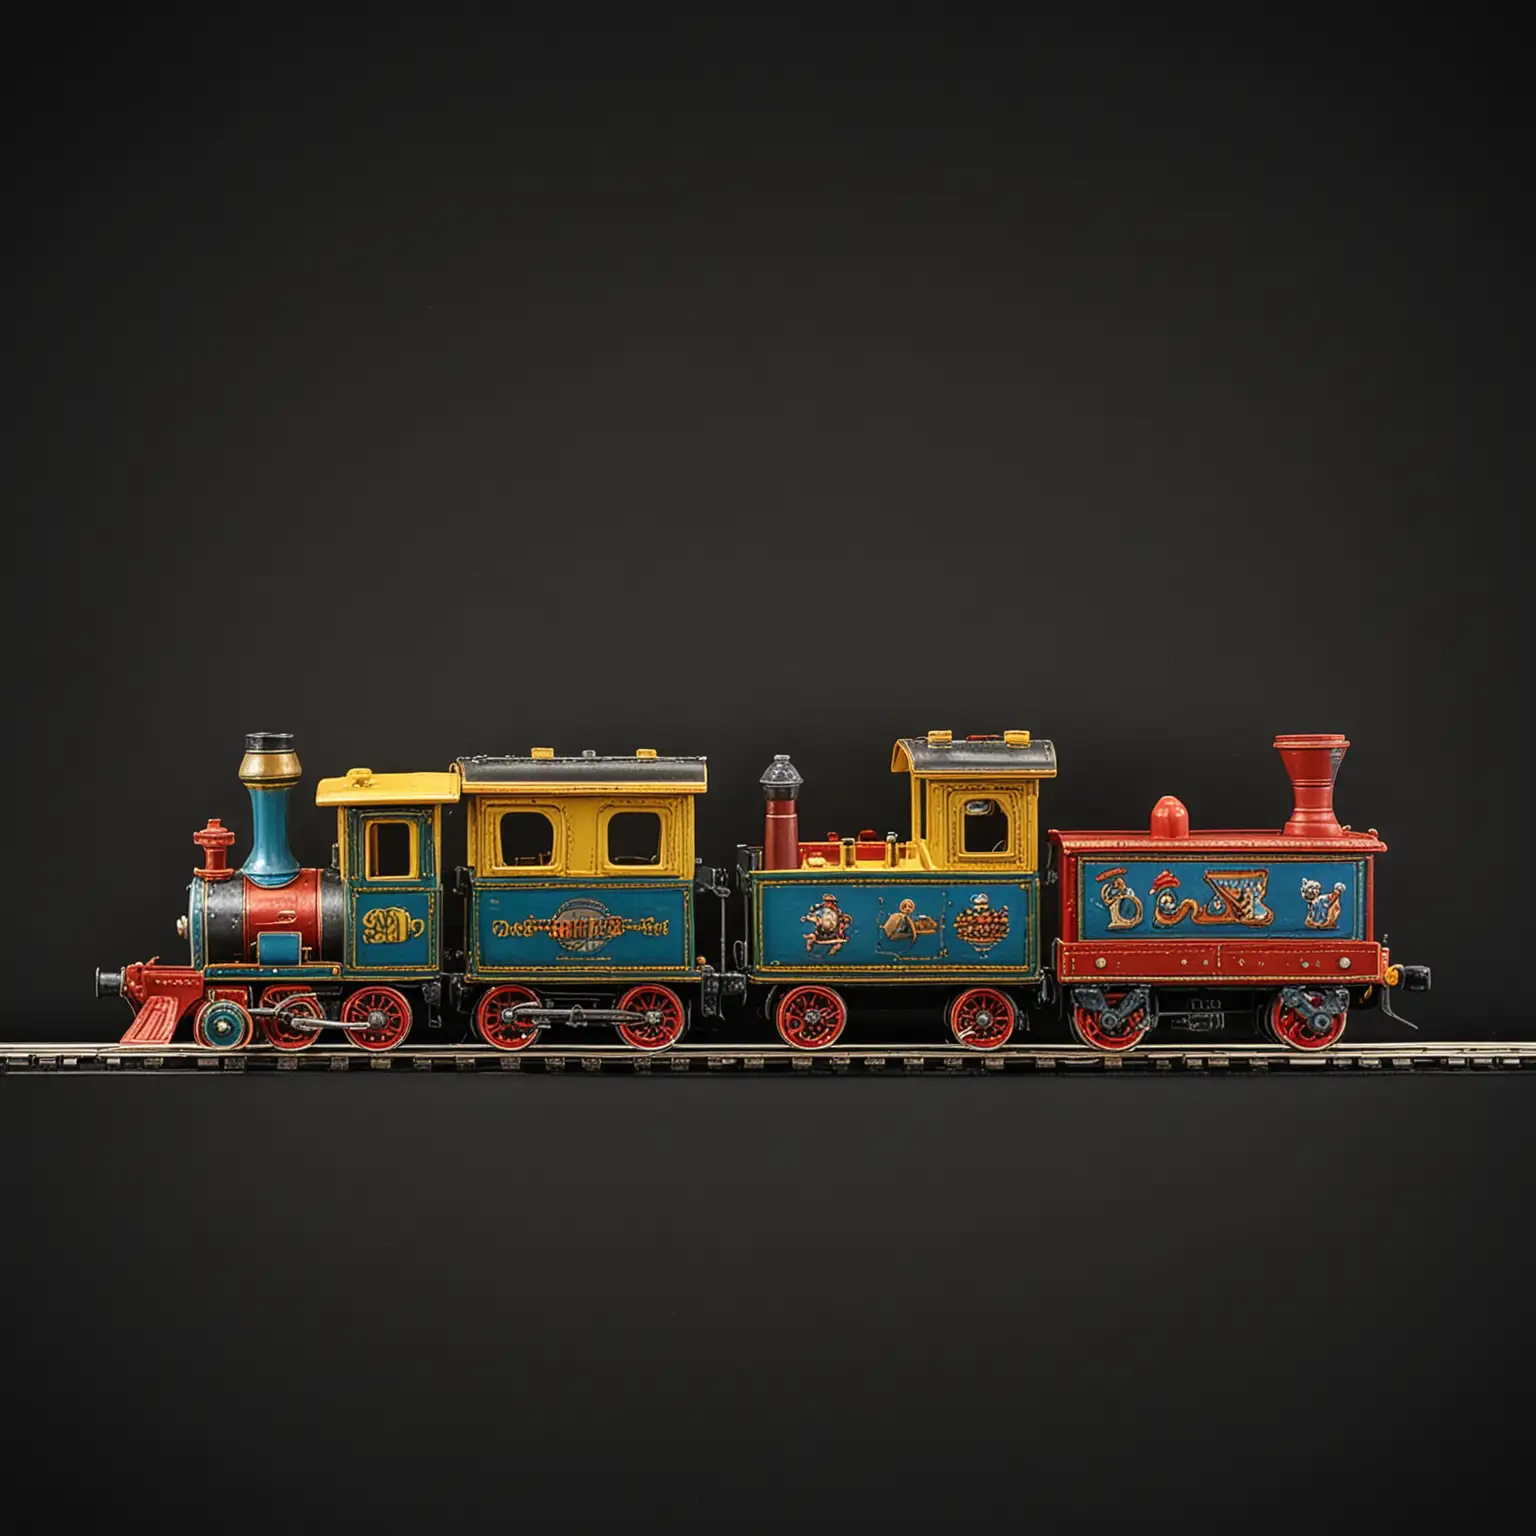 children style train side view against a black background

